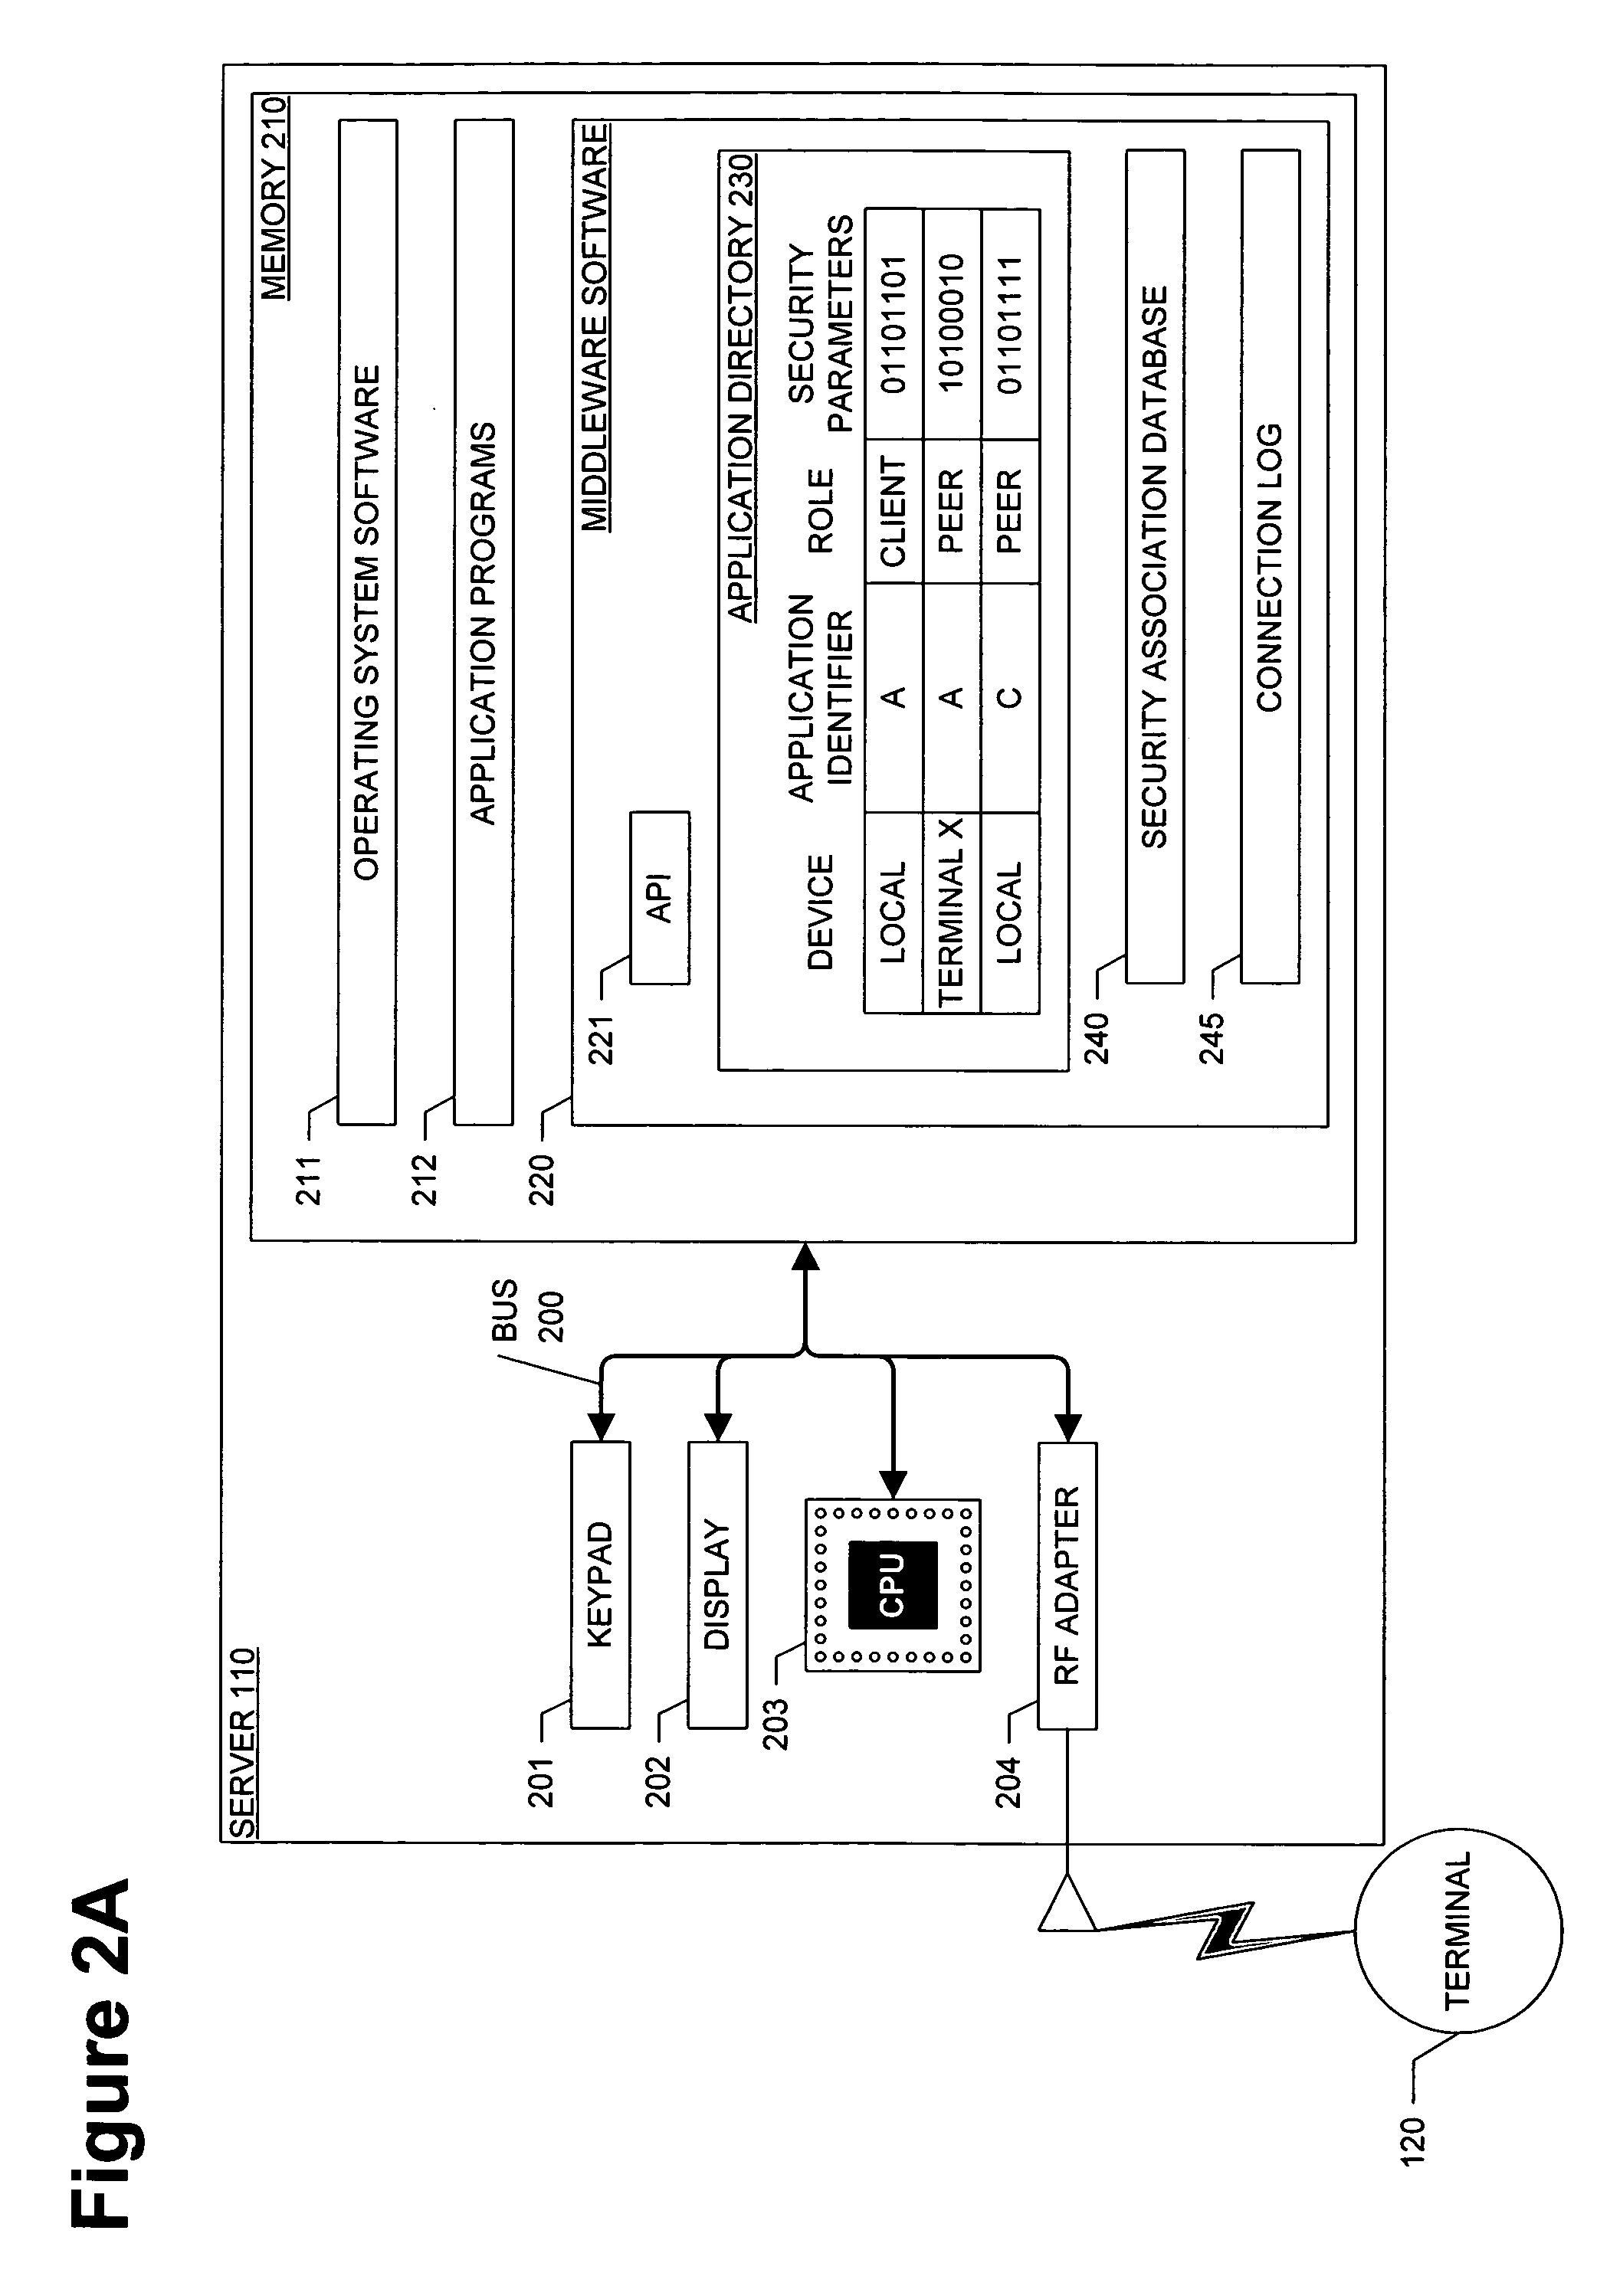 Method of initializing and using a security association for middleware based on physical proximity